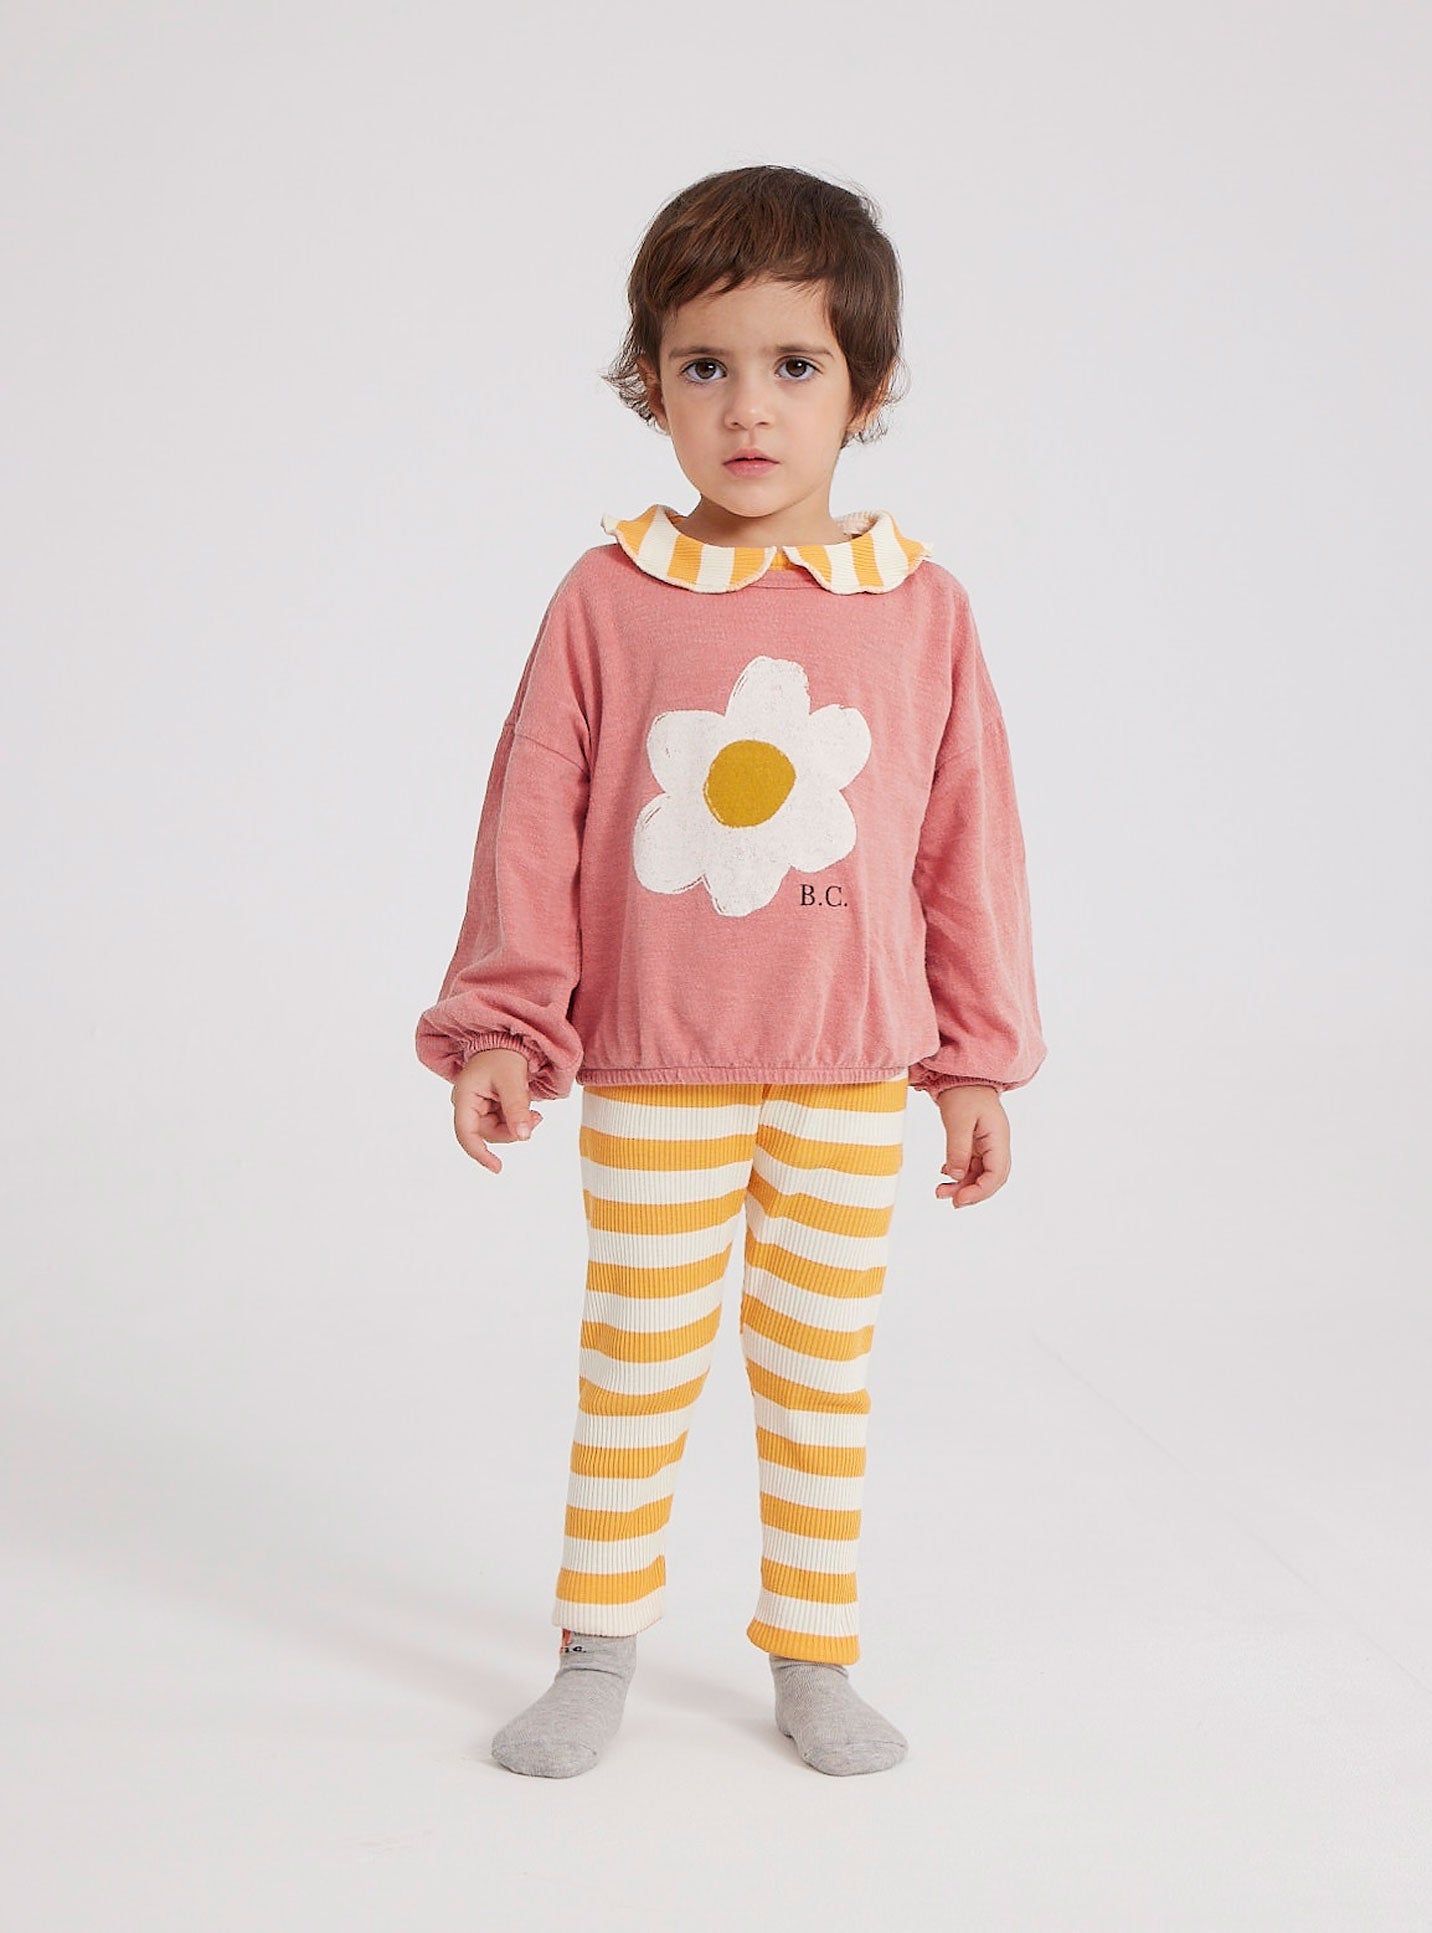 Bobo Choses Baby Big Flower Girl T-Shirt - 100% organic cotton salmon pink long sleeve t-shirt. Designed with long sleeves, dropped shoulder, shoulder snap fastening, elasticated bottom and elasticated cuffs. It has a loose fit. It has a loose fit. Made in Spain.